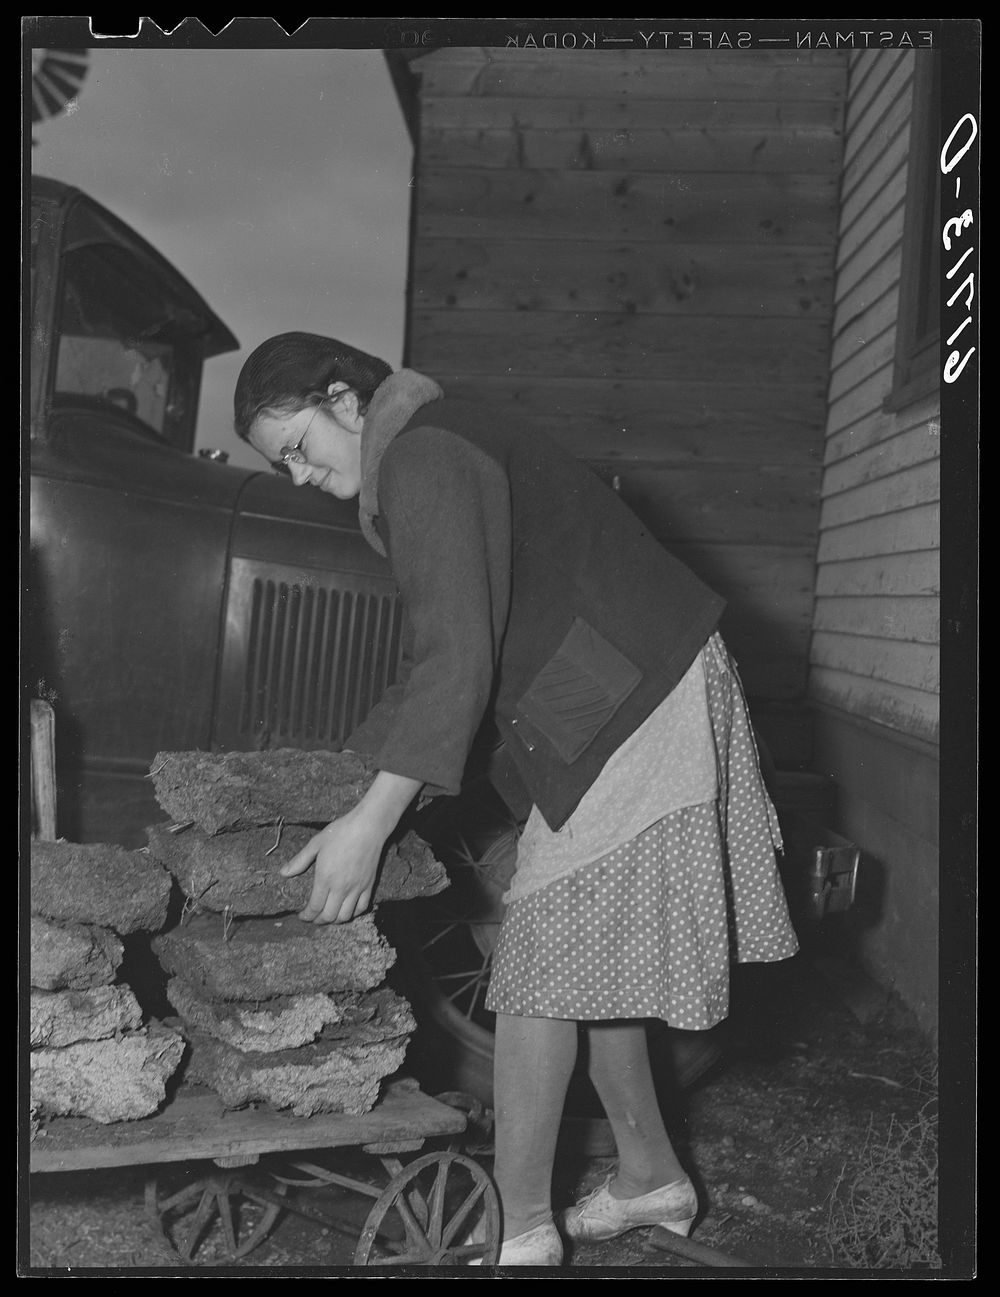 Gathering "barnyard lignite" for use as fuel in kitchen stove. McIntosh County, North Dakota. Sourced from the Library of…